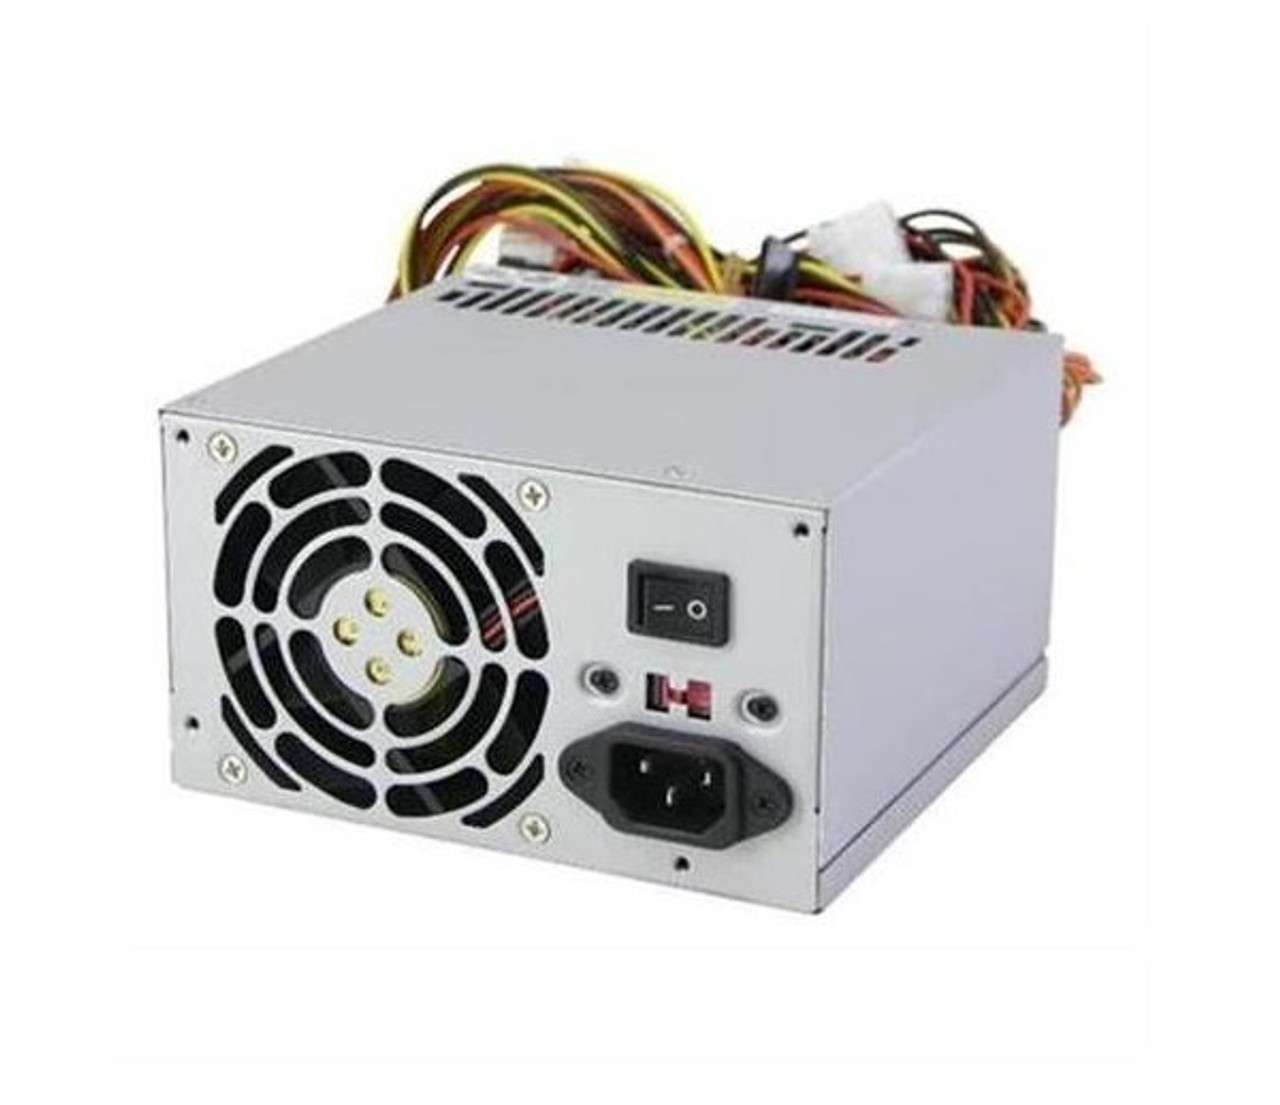 0950-4155 - HP 120-Watts 120-240V ATX Switchable Power Supply for Vectra VL400/VL600